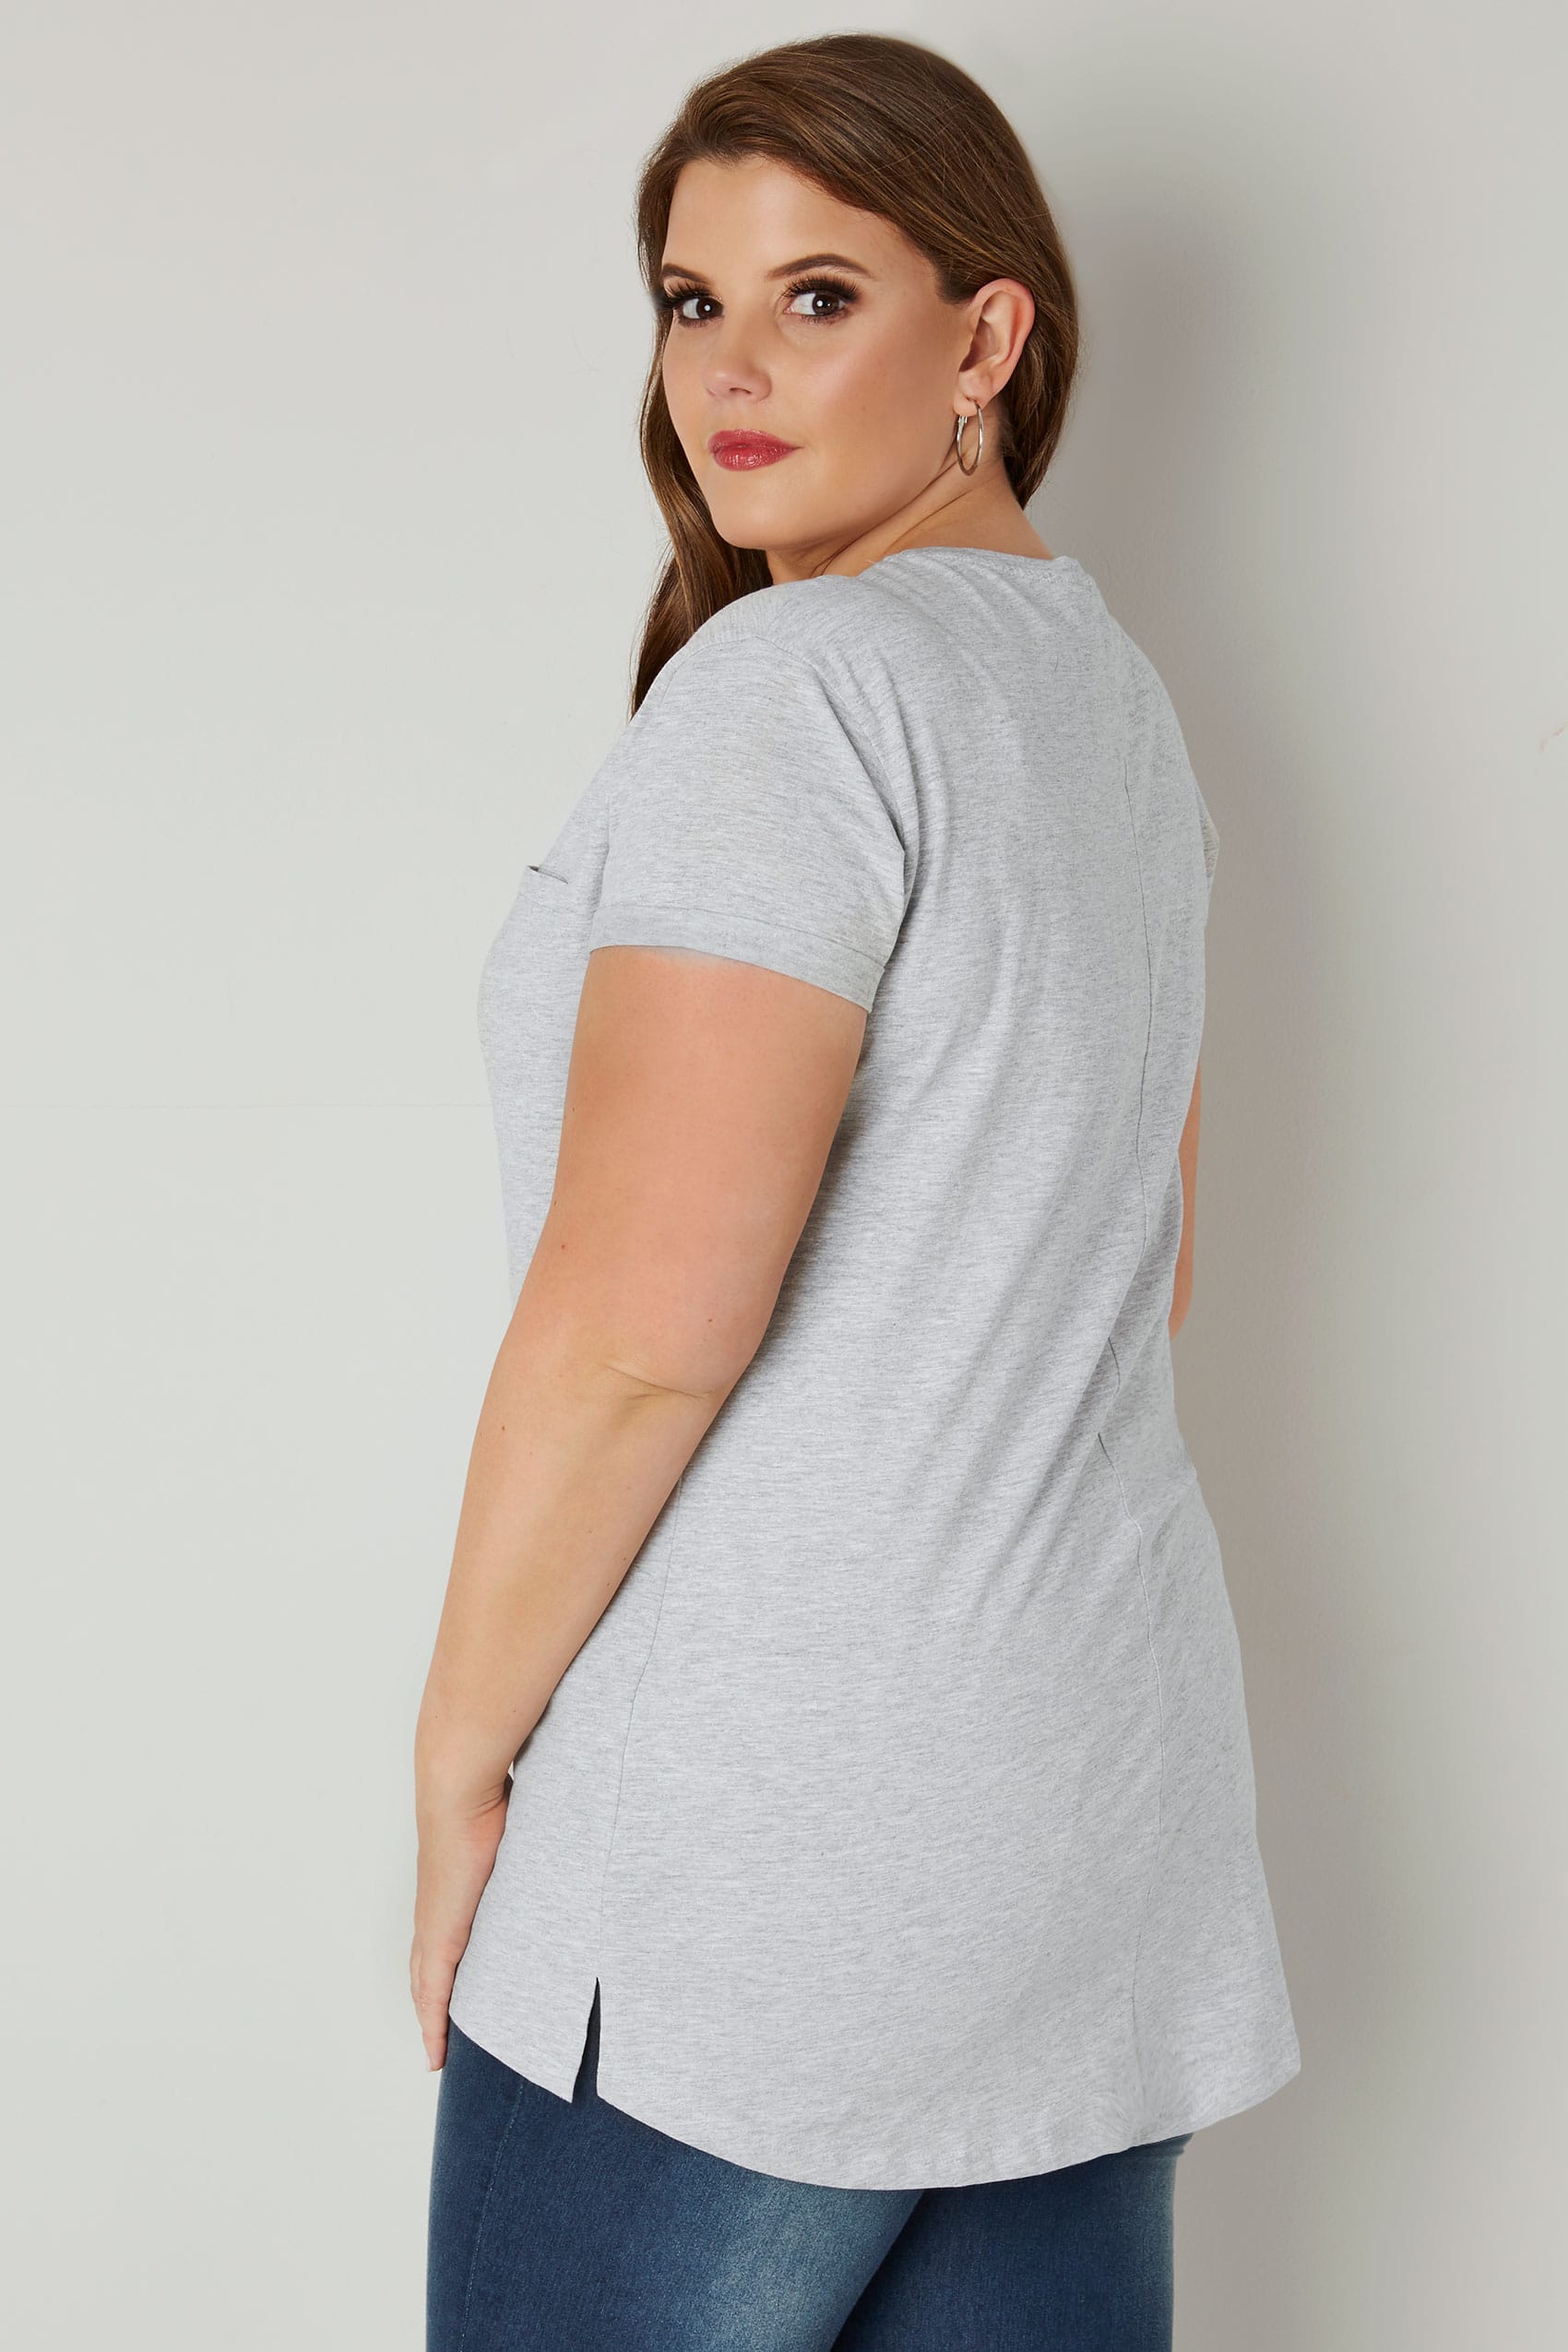 Download Grey Marl Mock Pocket T-Shirt With Curved Hem, Plus size 16 to 36